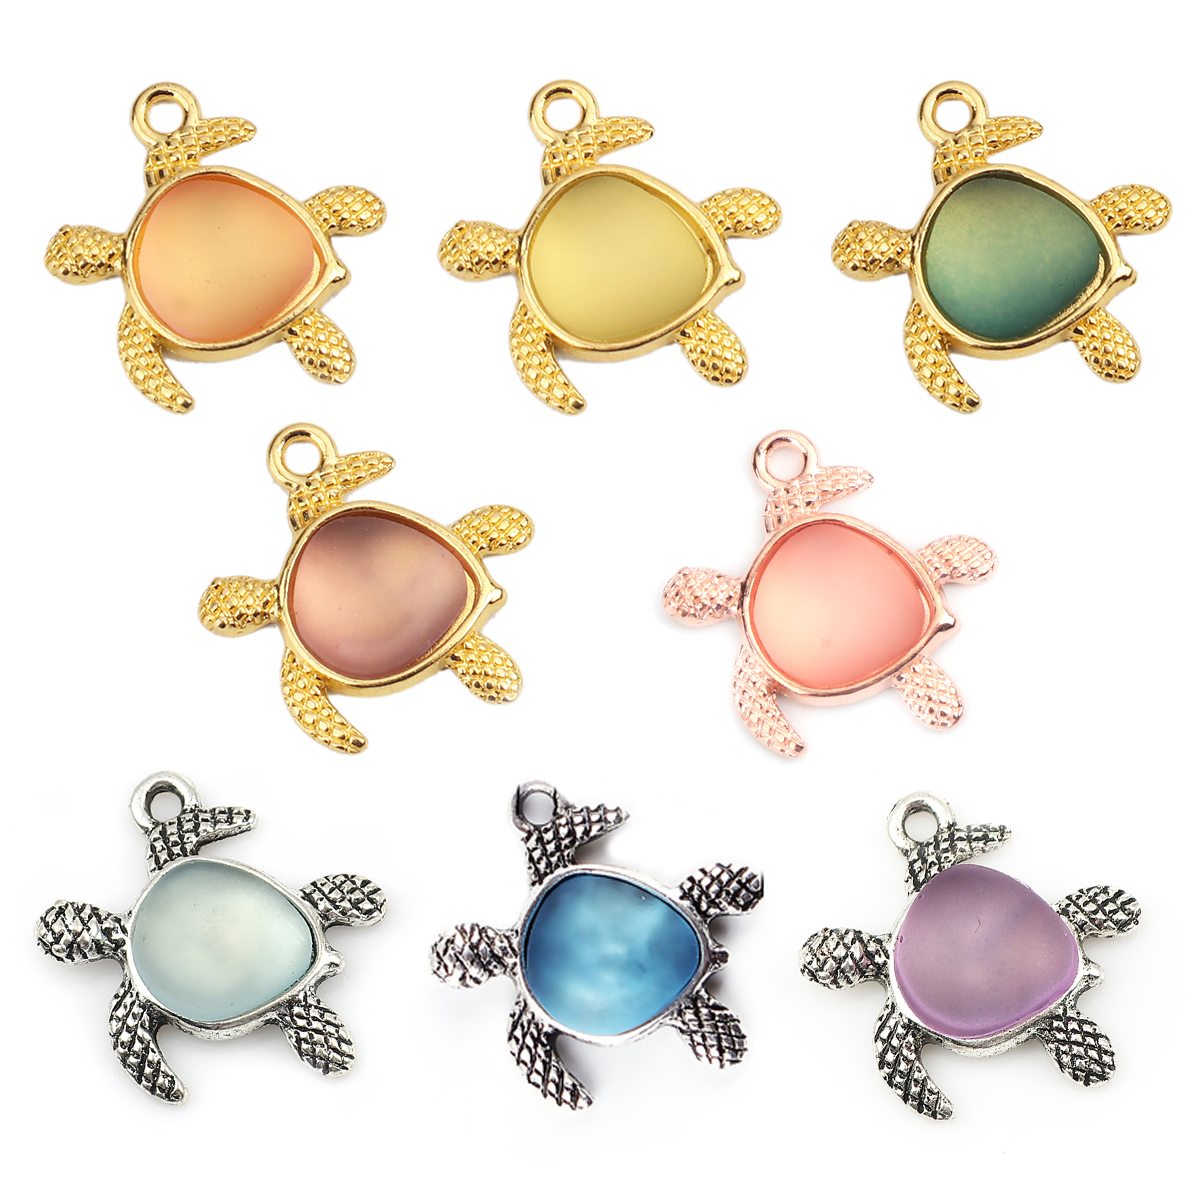 Picture of Zinc Based Alloy Ocean Jewelry Charms Tortoise Animal Gold Plated Pale Yellow 20mm x 19mm, 5 PCs